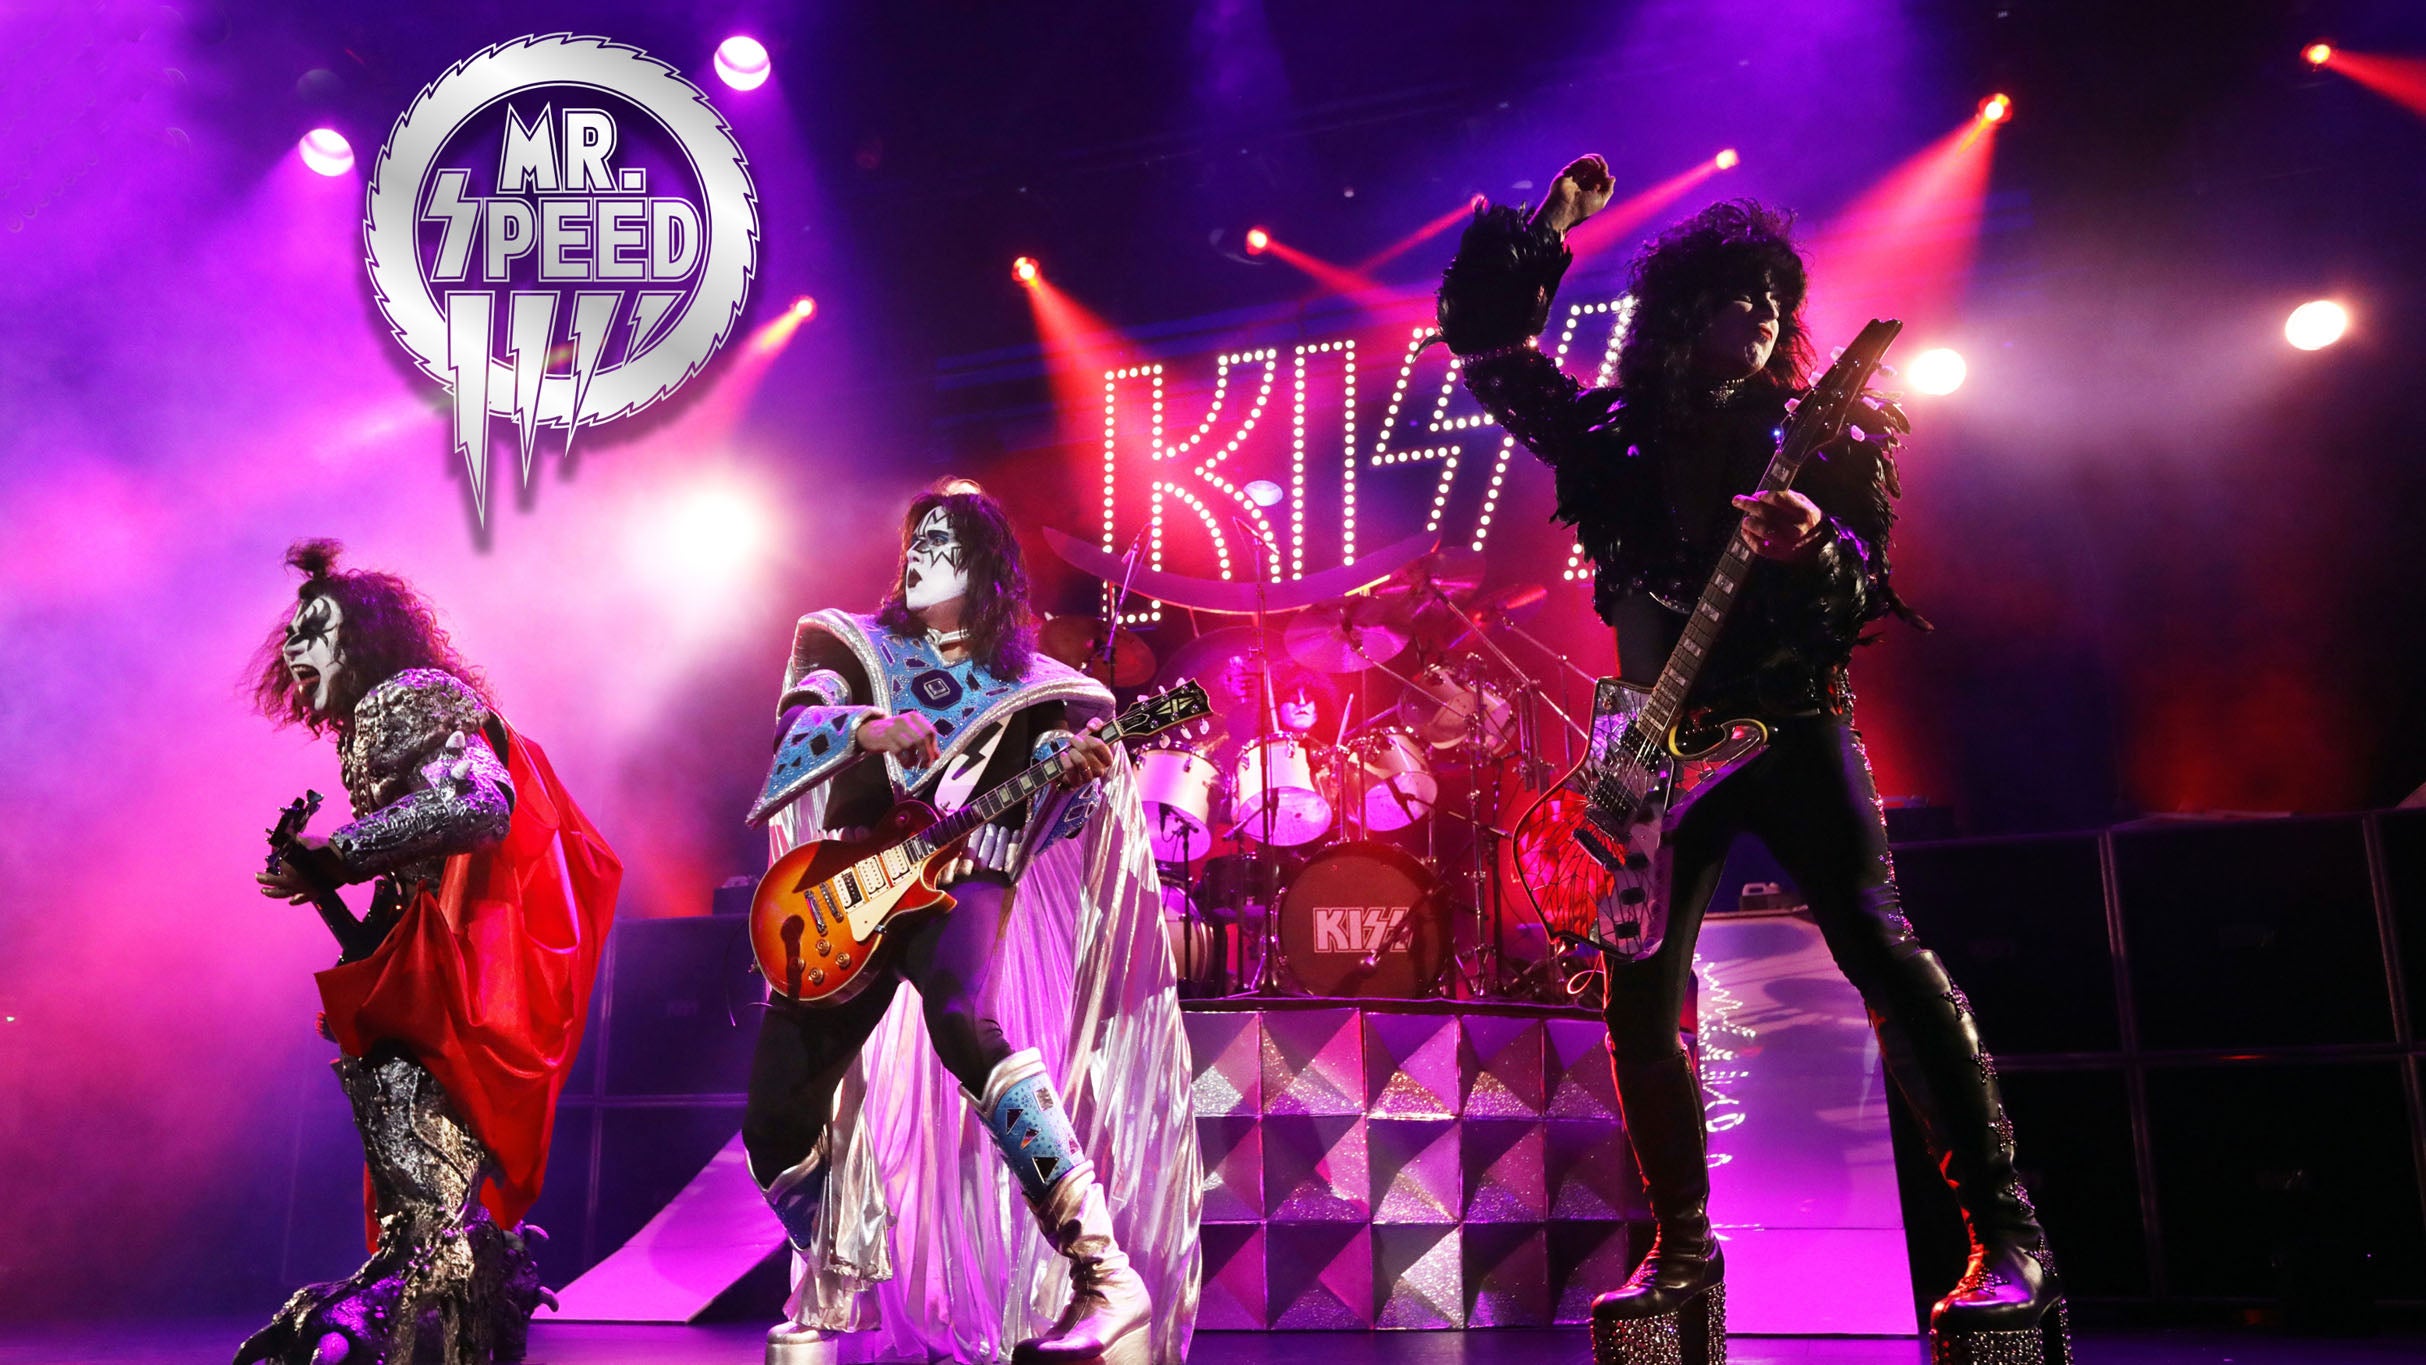 Mr. Speed - A Tribute to Kiss presale code